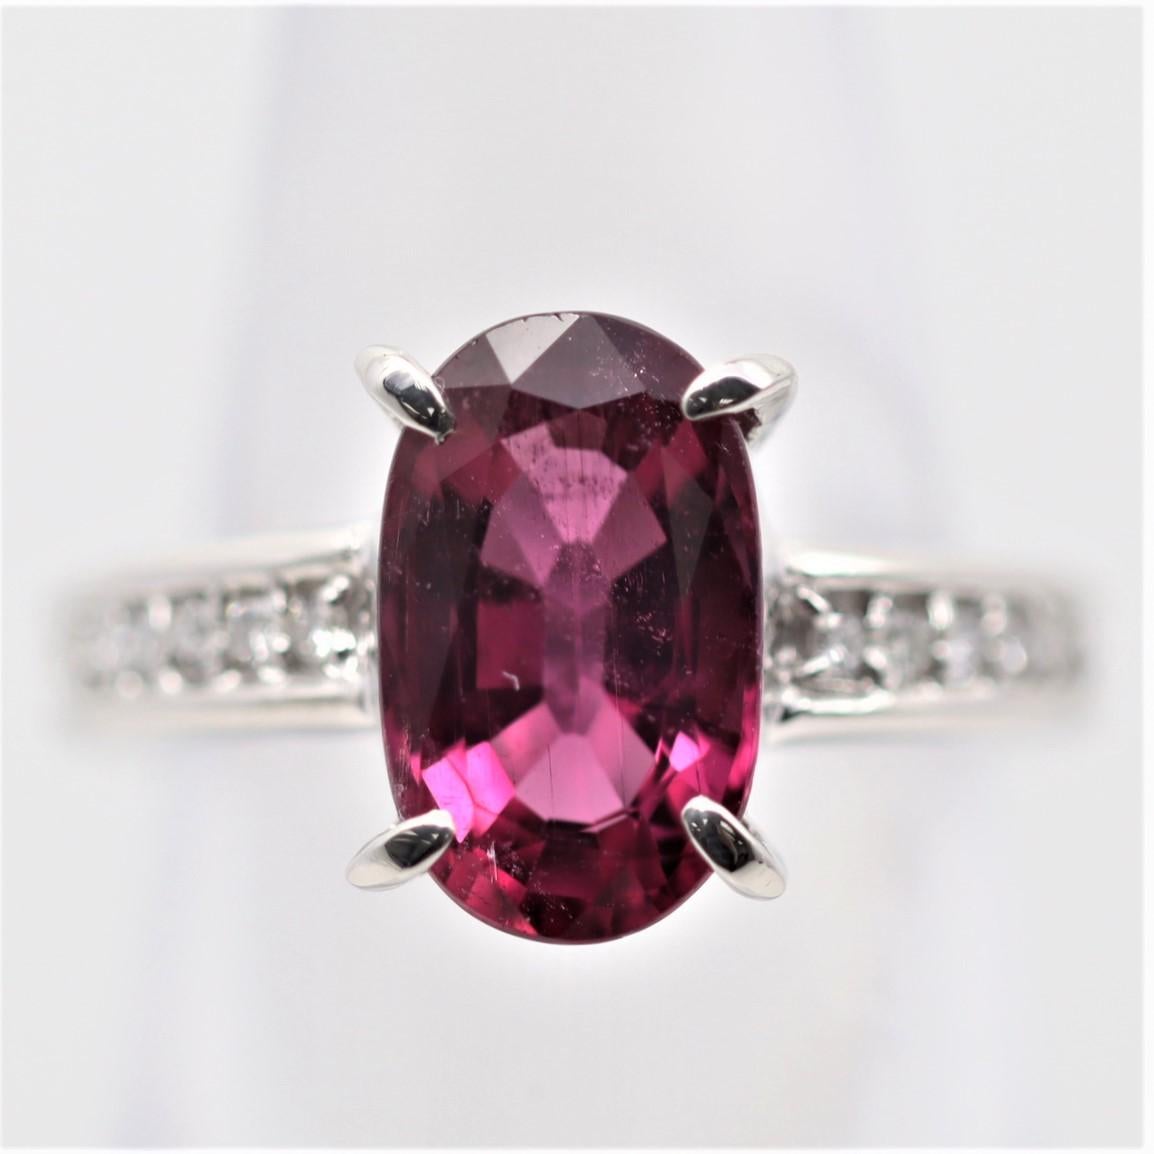 A 3.59 carat gem rubellite tourmaline with a vivid red color takes center stage. It is free of eye-visible inclusions allowing the stones natural color to shine. It is accented by 0.15 carats of diamonds set on its shoulders adding brilliance to the